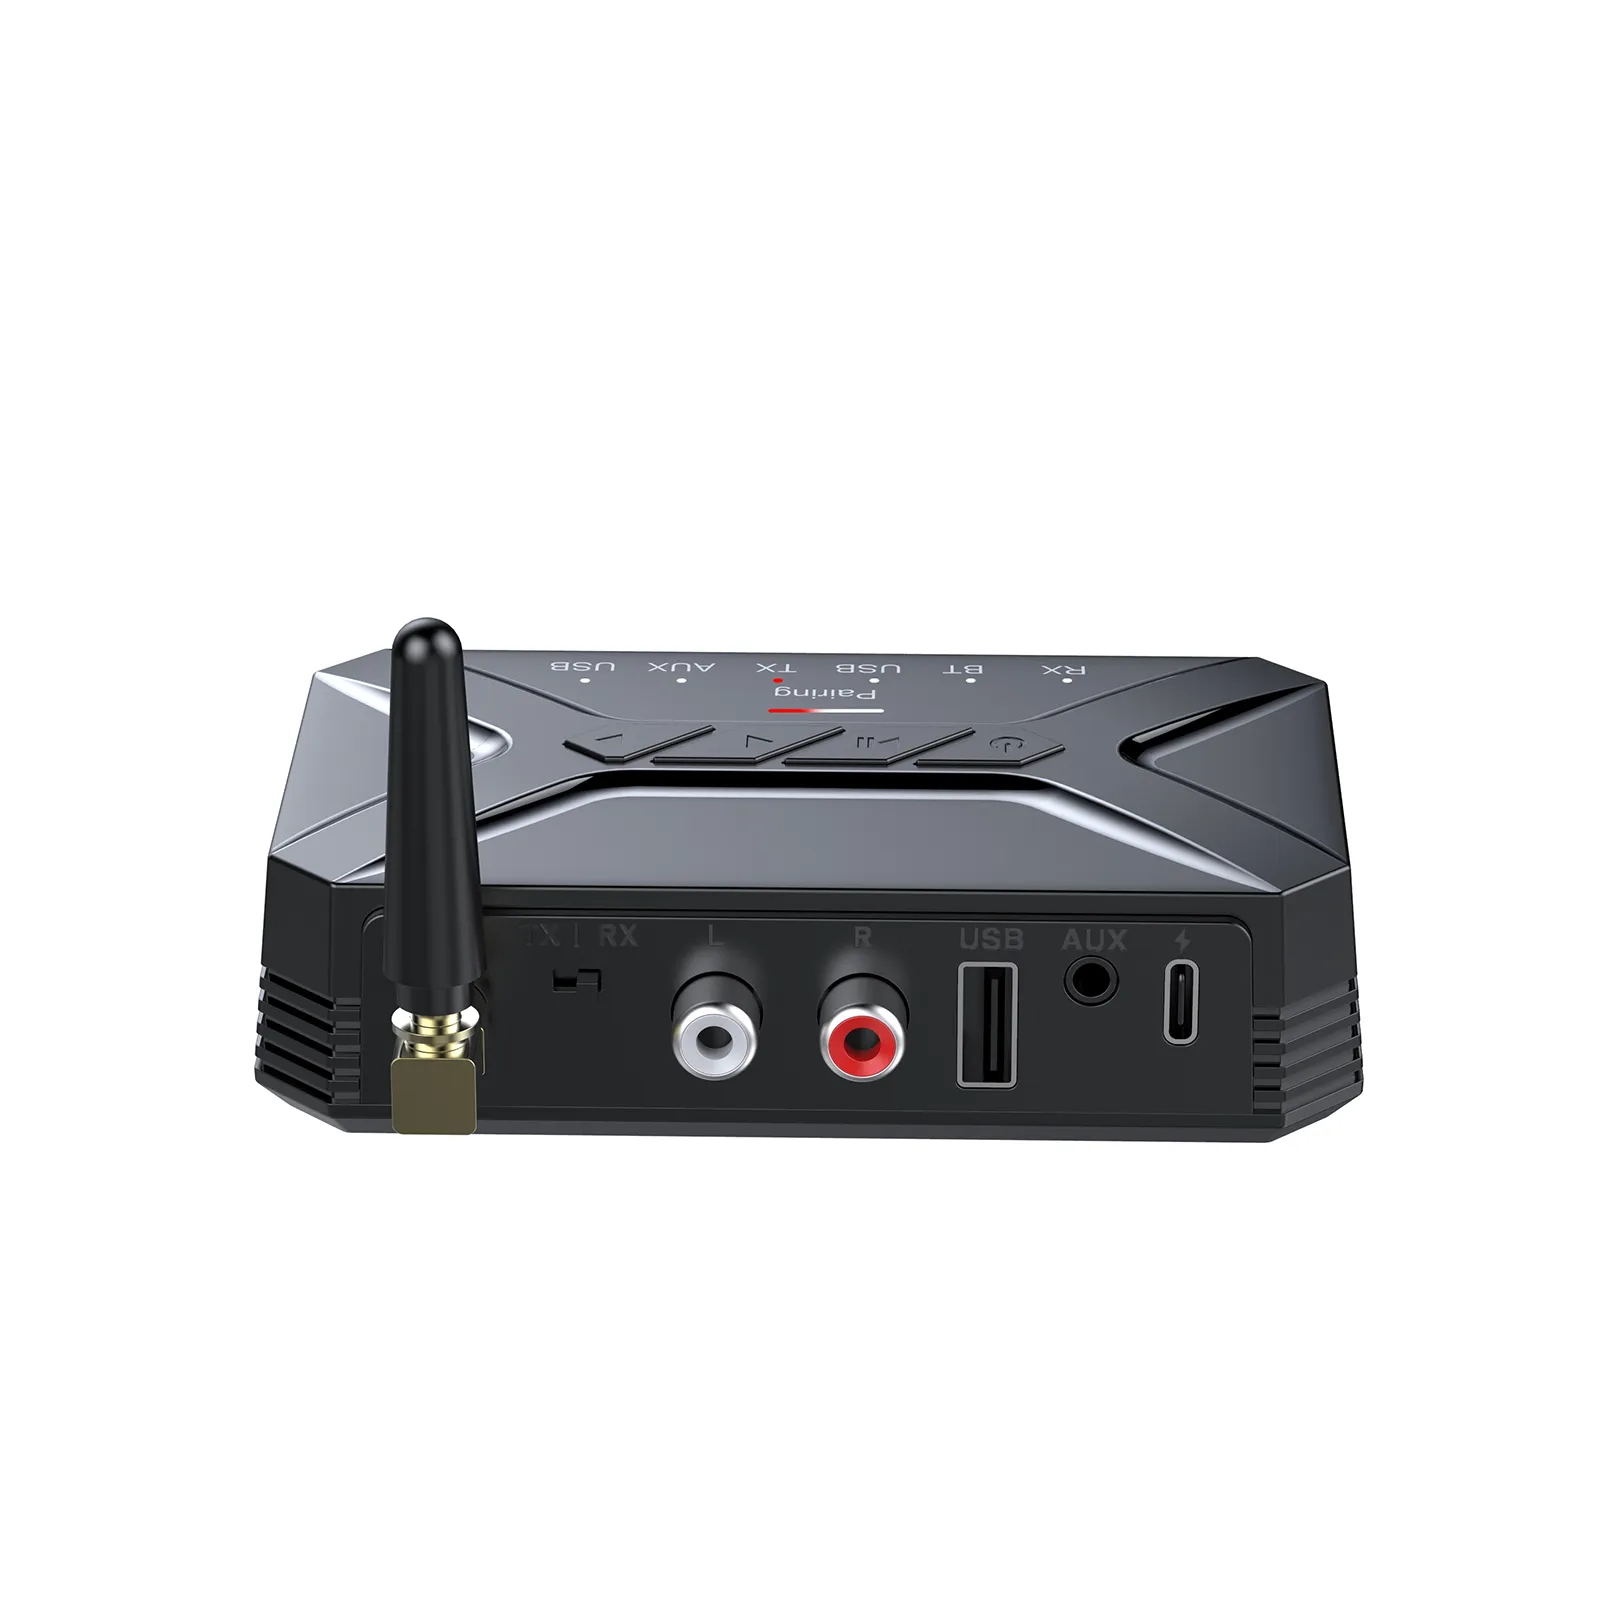 BT5.0 Audio Receiver Transmitter 2 In 1 Wireless Adapter With Wifi Adapter  Usb, RCA, AUX Input For TV, Car, Stereo Speaker, Headphone T R22 From  Che9999, $8.55